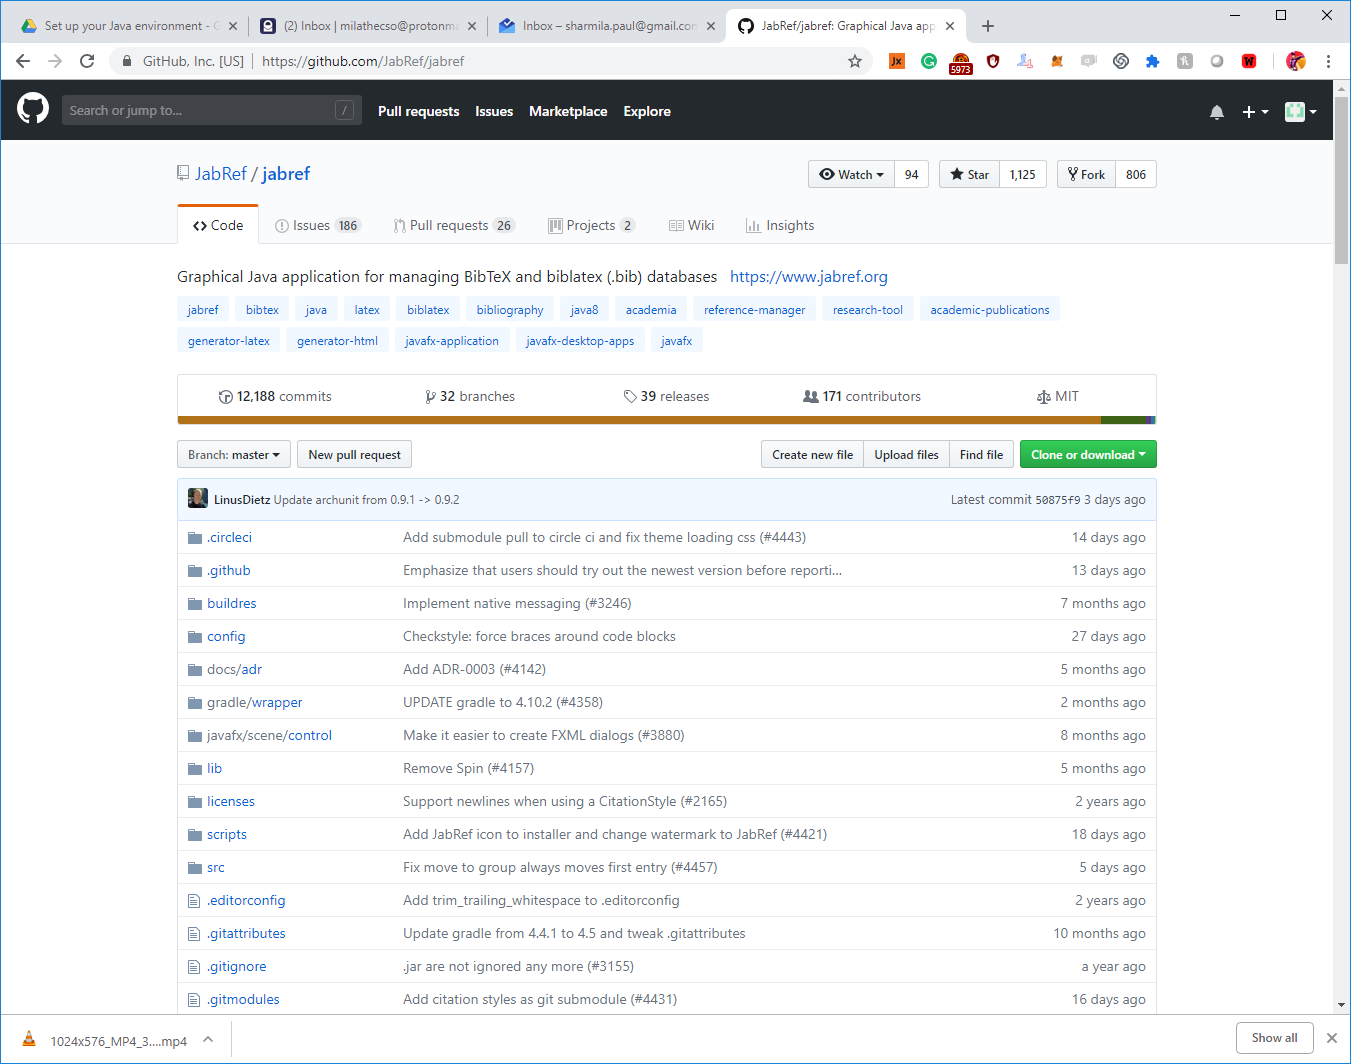 The JabRef Java Open Source Project on Github